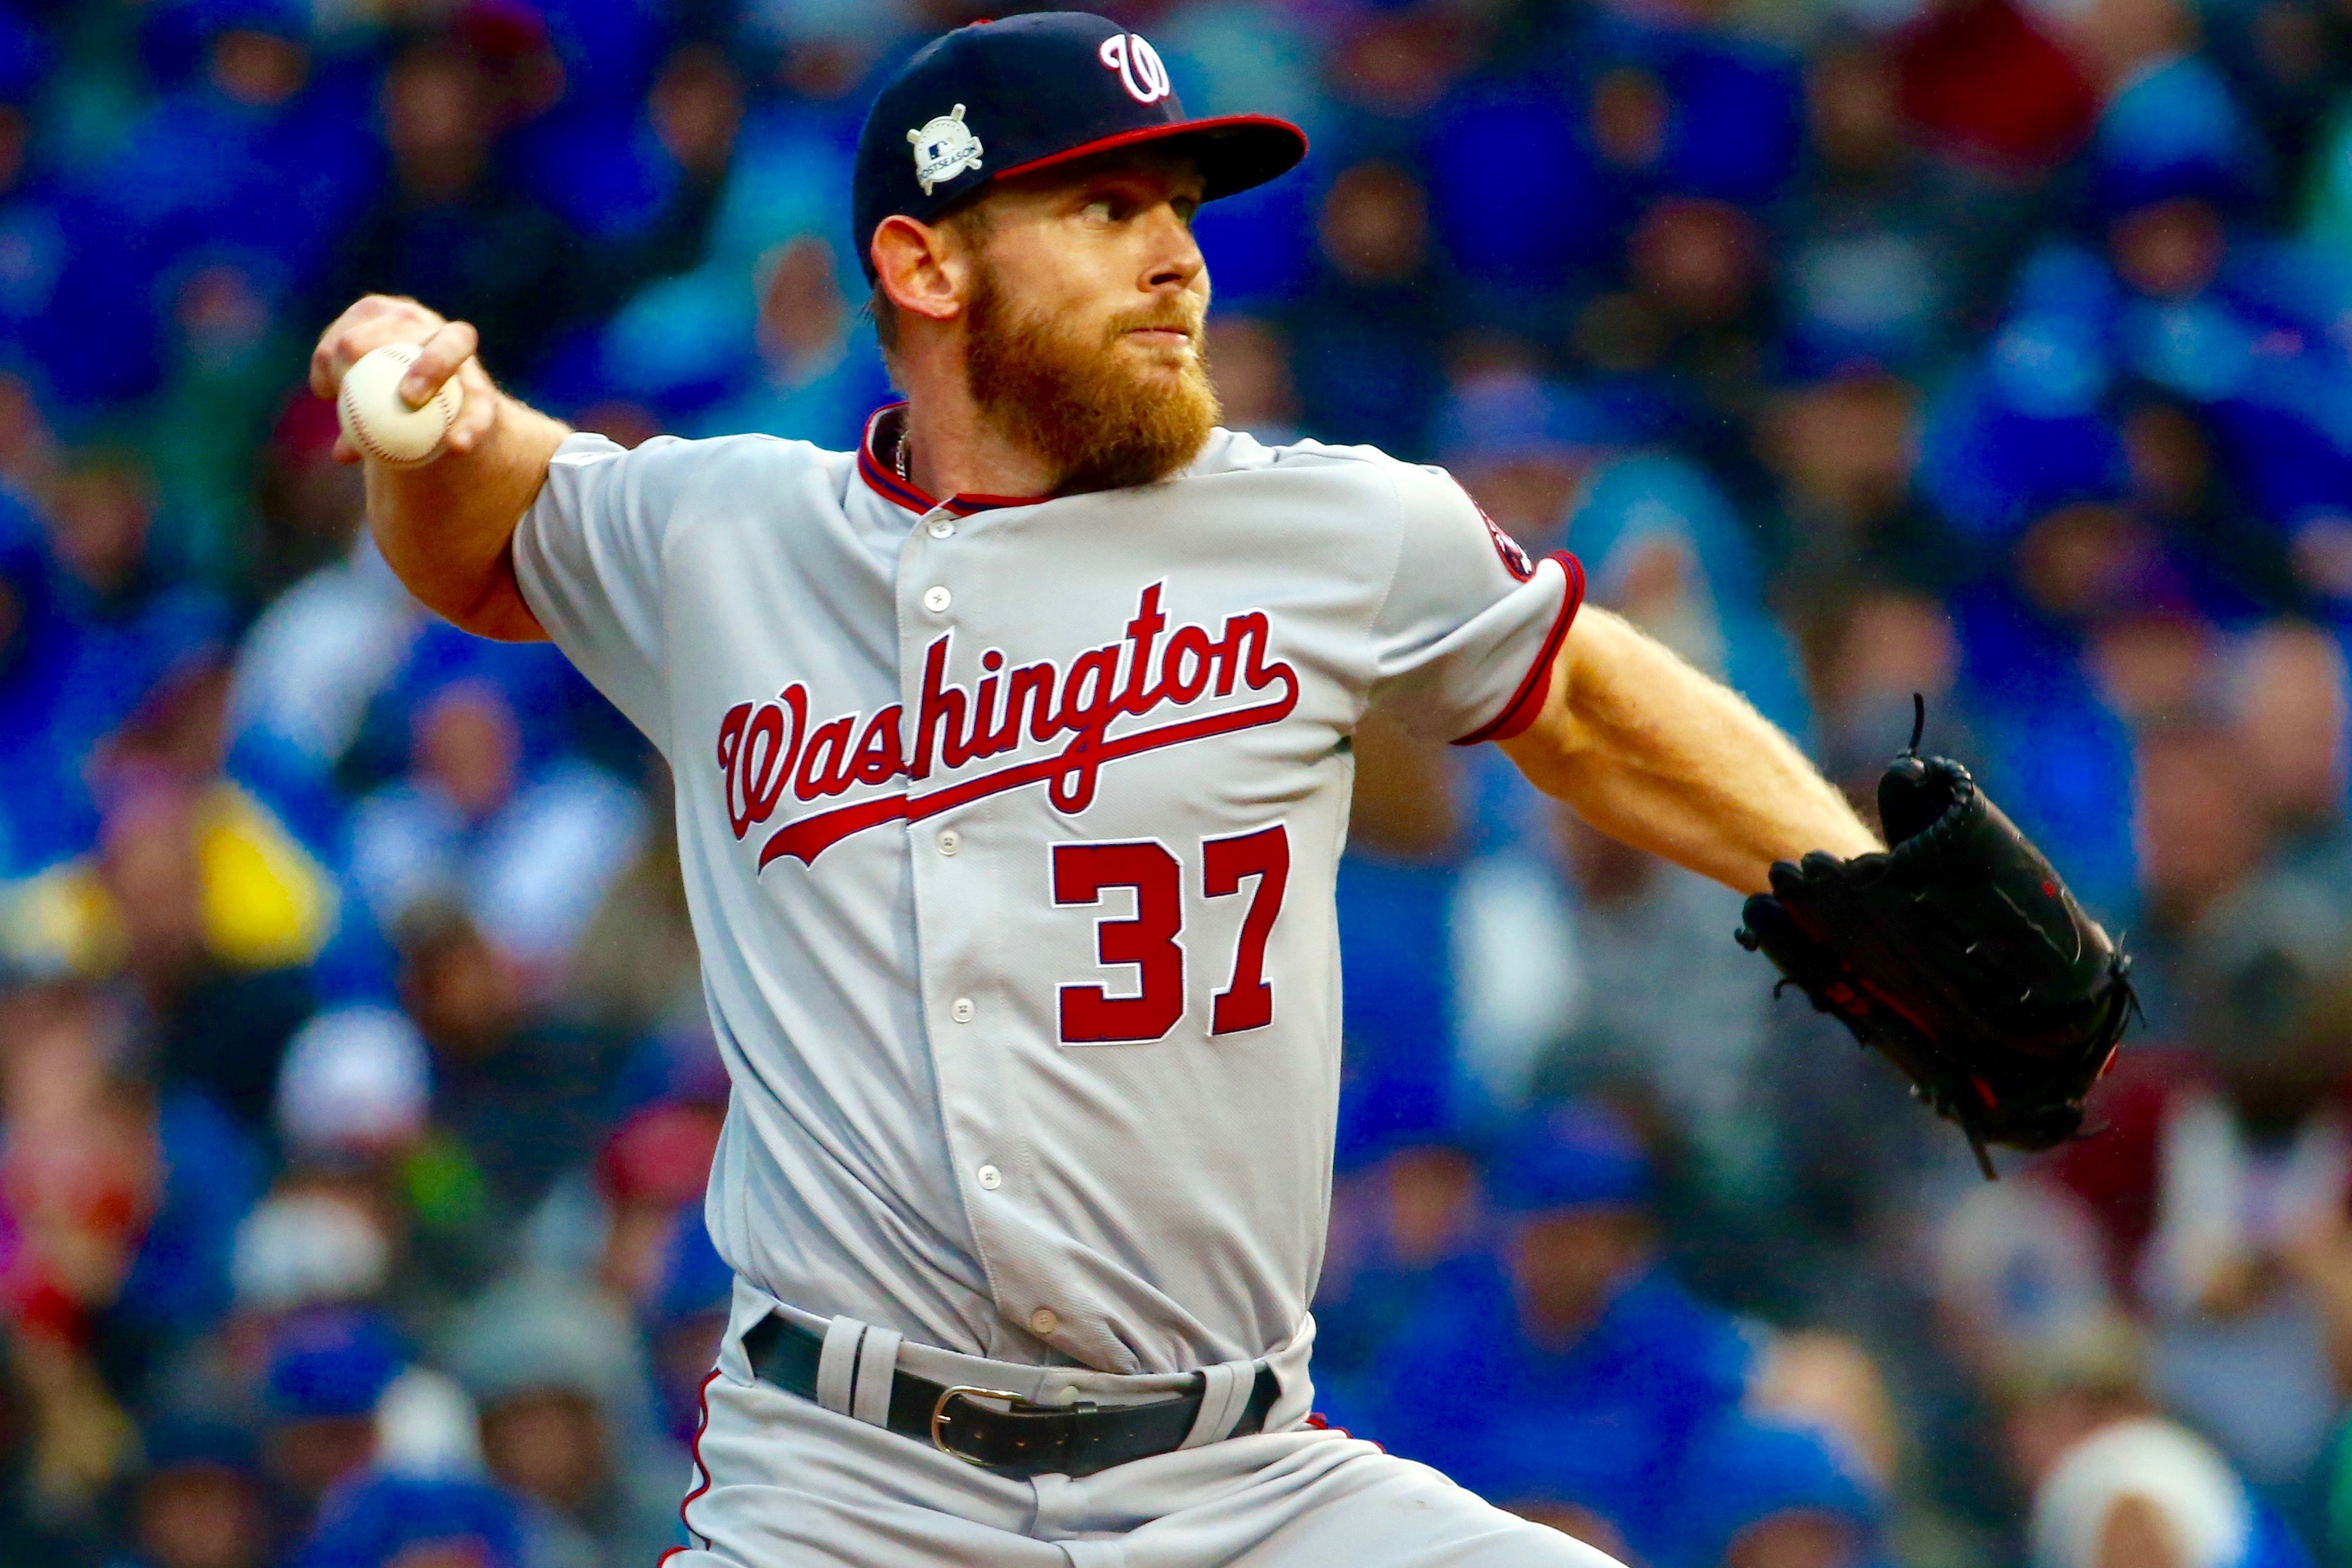 June 8, 2010: Stephen Strasburg strikes out 14 in MLB debut – Society for  American Baseball Research